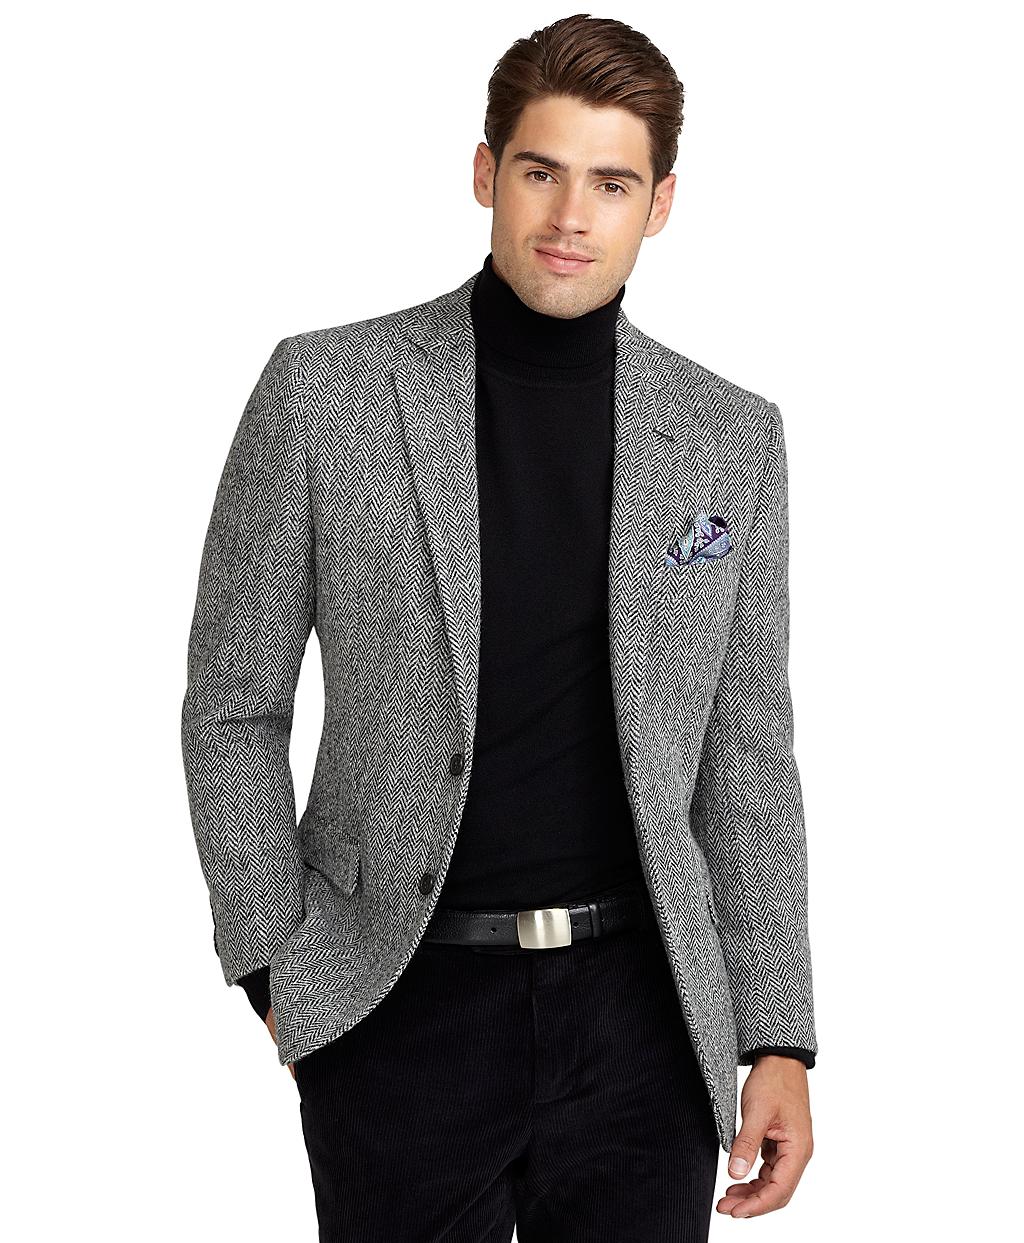 Lyst - Brooks Brothers Fitzgerald Fit Harris Tweed Sport Coat in White ...